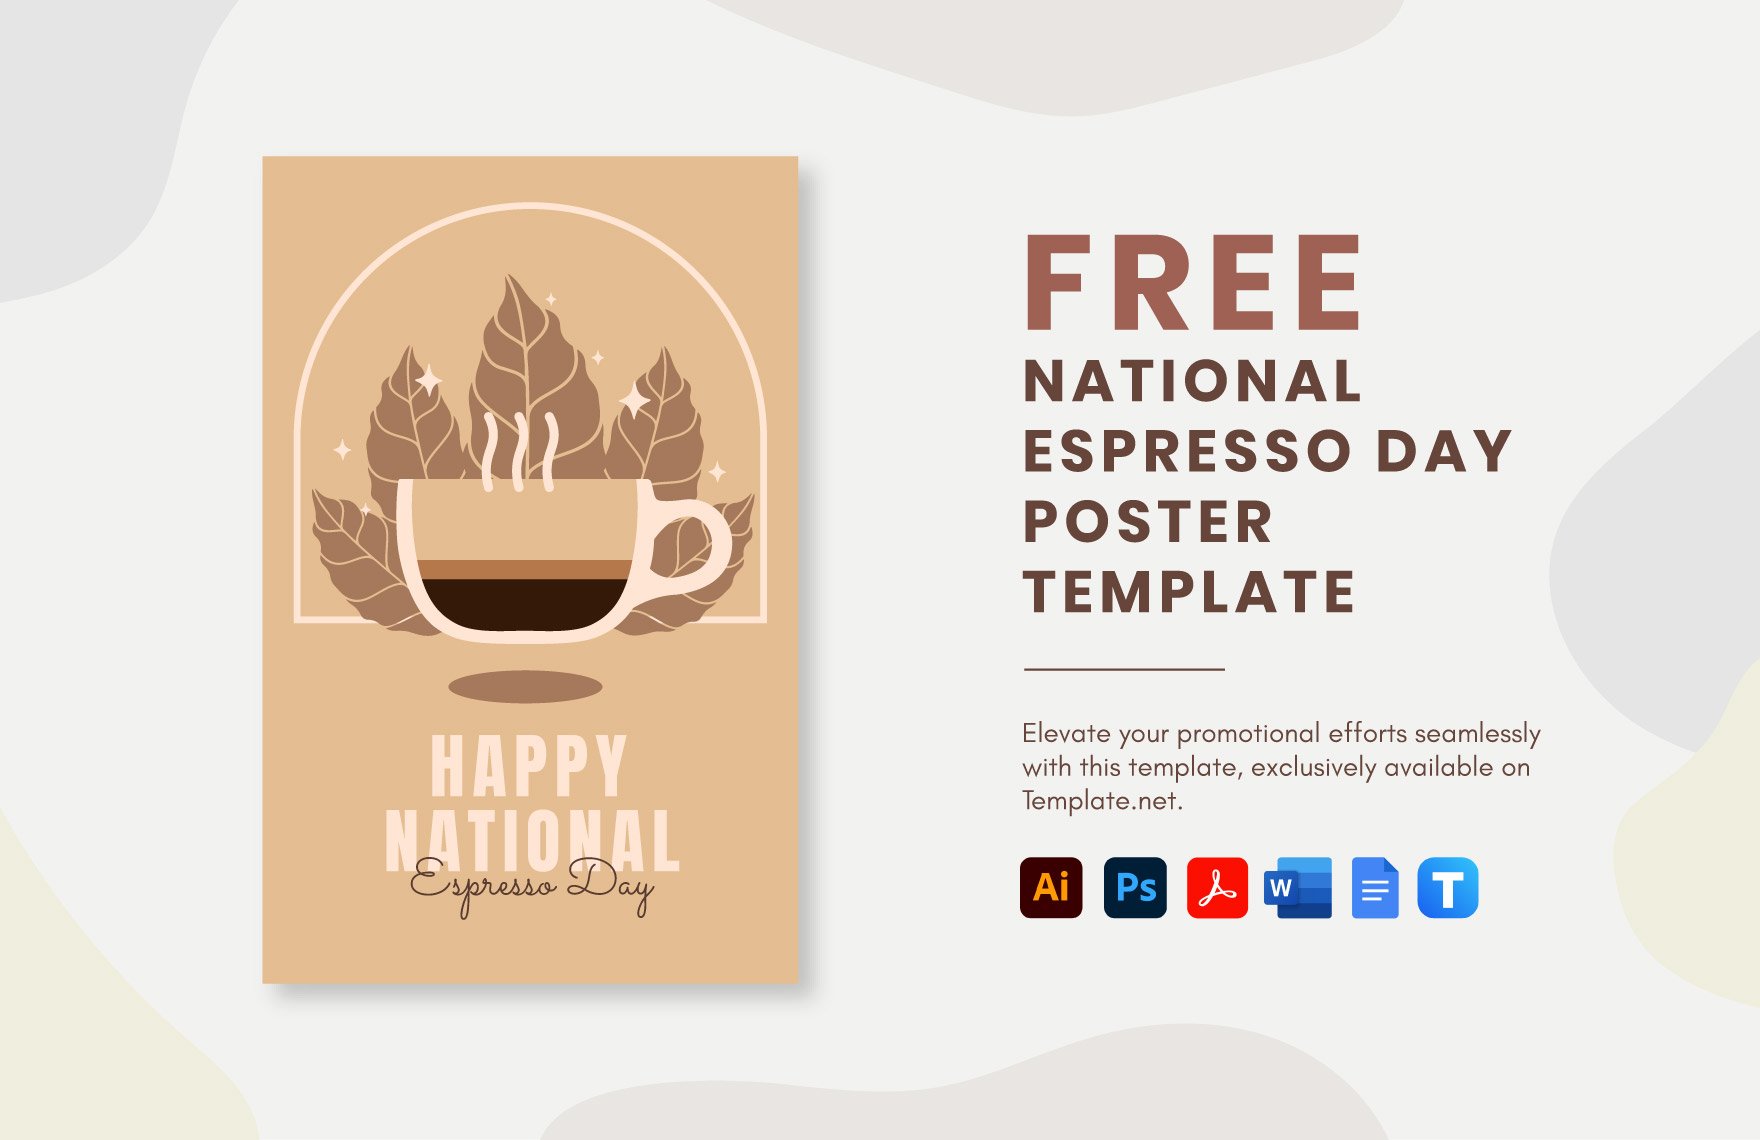 Free National Espresso Day Poster Template